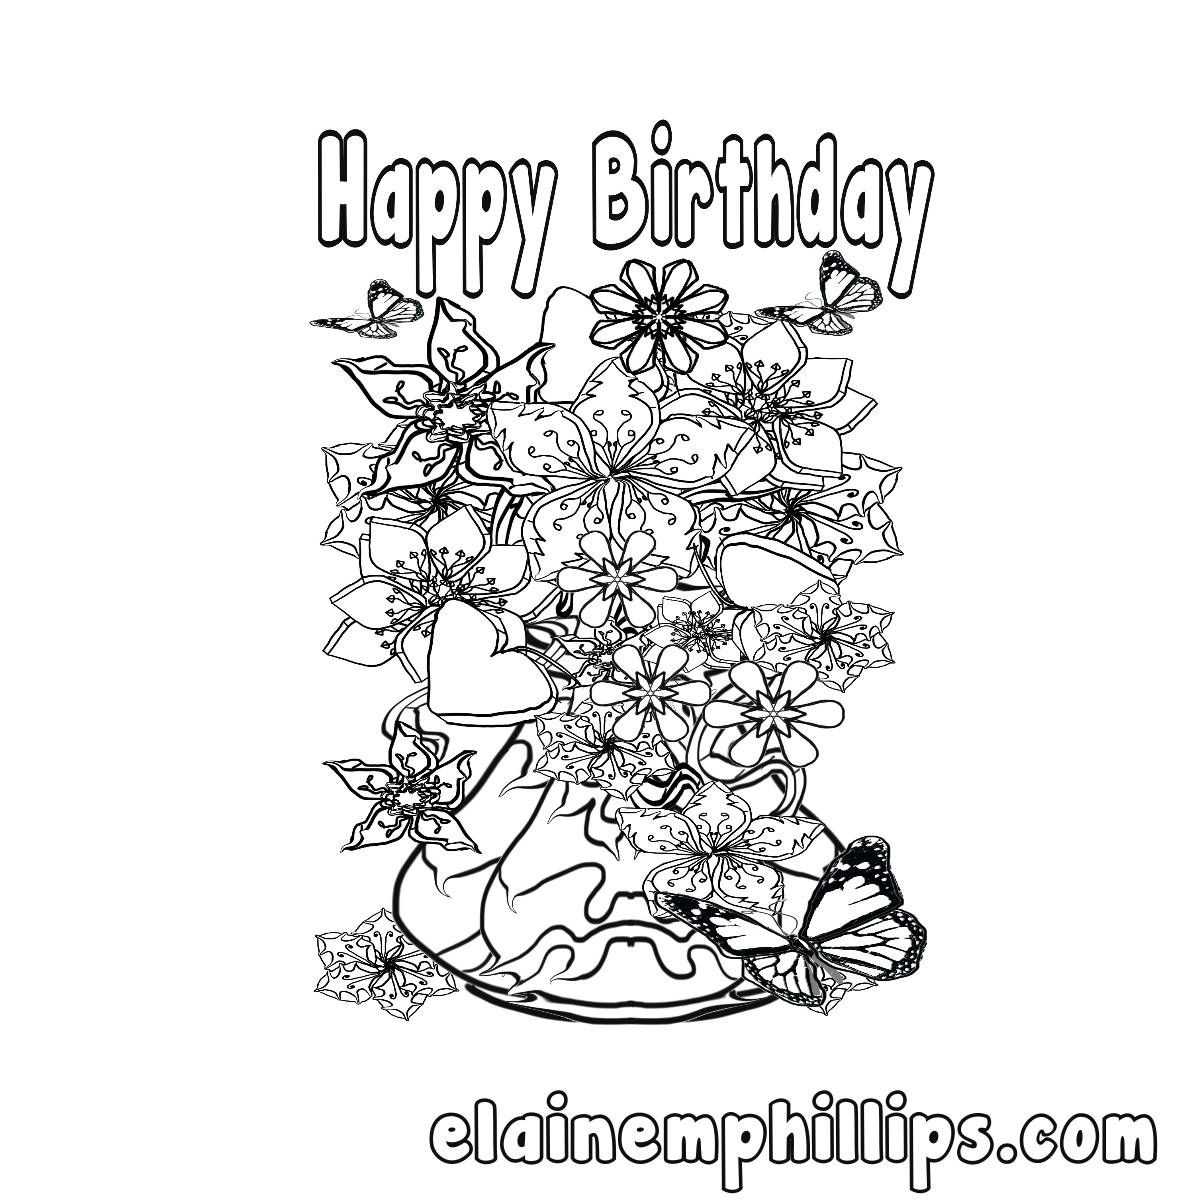 Coloring : Phenomenal Printableg Birthday Card Free For With Mom Birthday Card Template